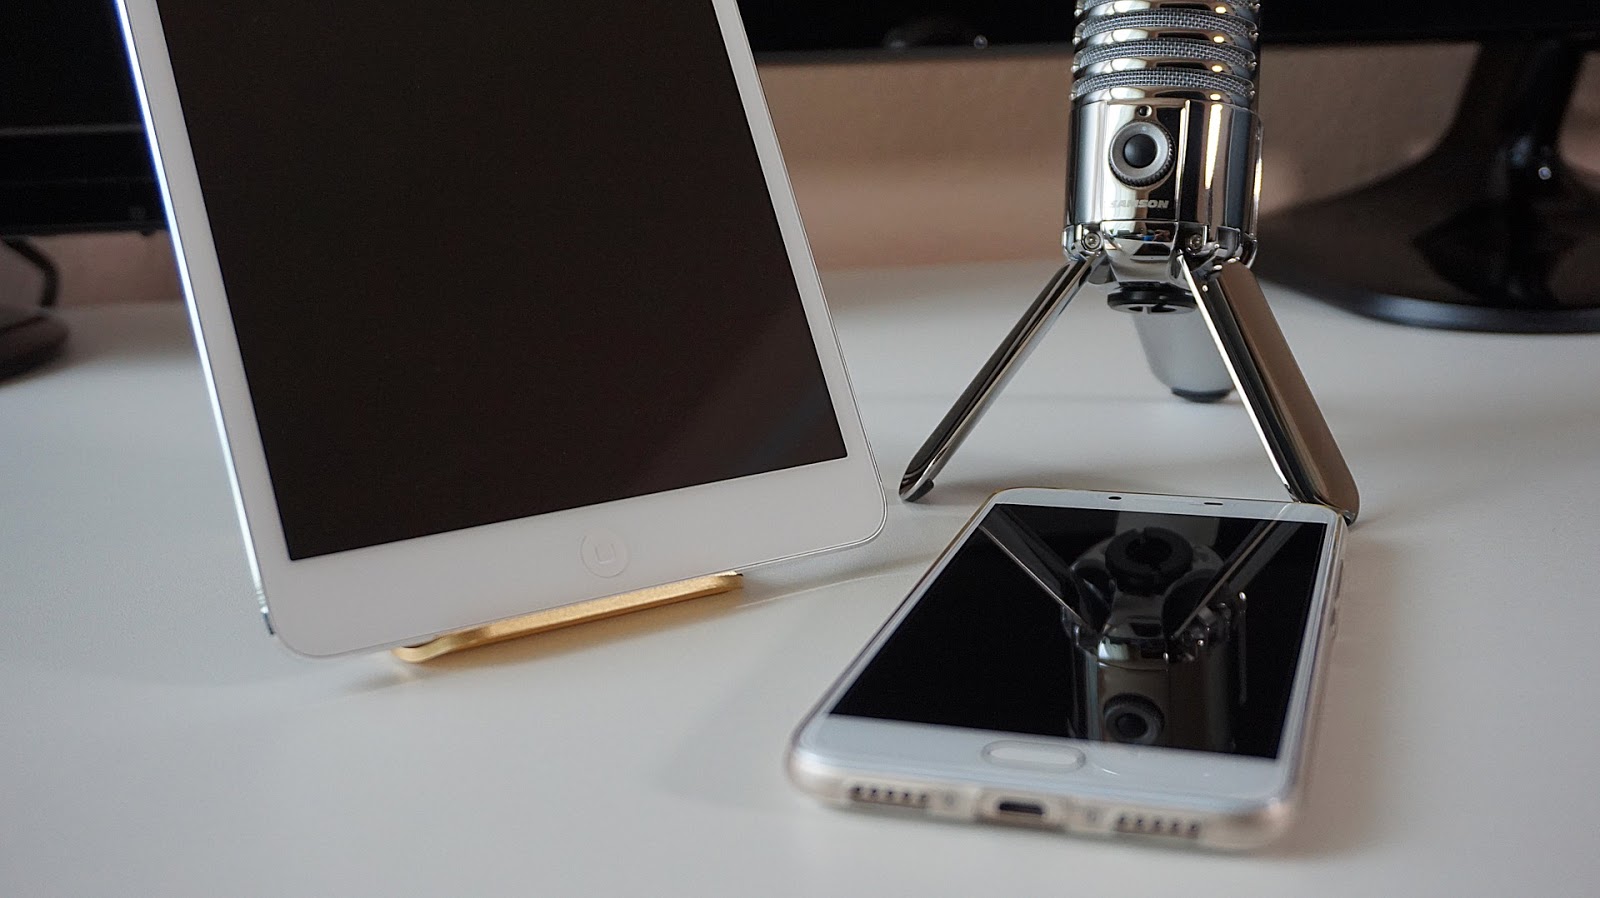 What to look for in a podcast hosting service